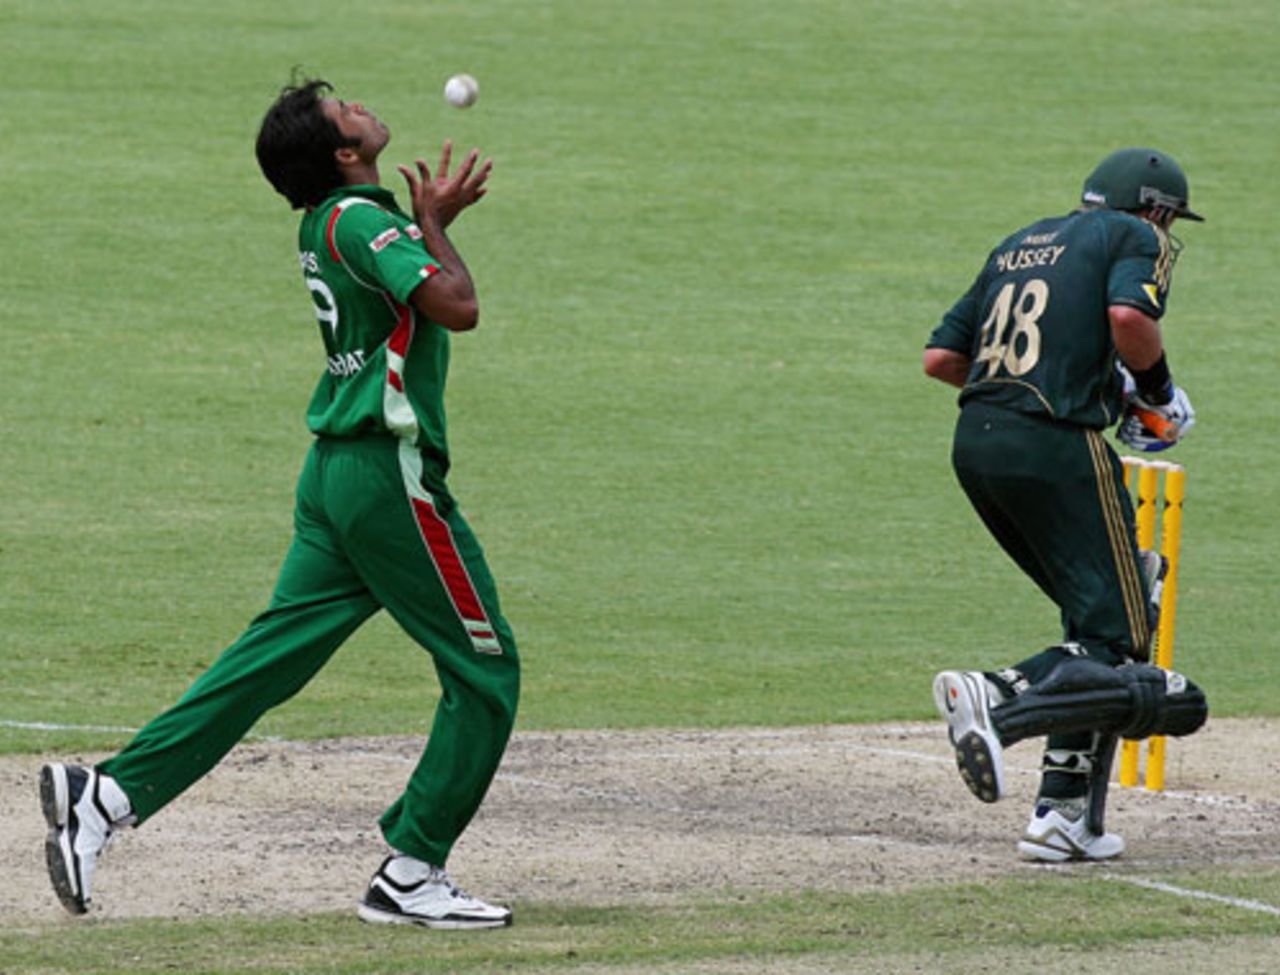 Shahadat Hossain accepts the caught-and-bowled of Mitchell Johnson, one of three wickets he took in the final over, Australia v Bangladesh, 1st ODI, Darwin, August 30, 2008